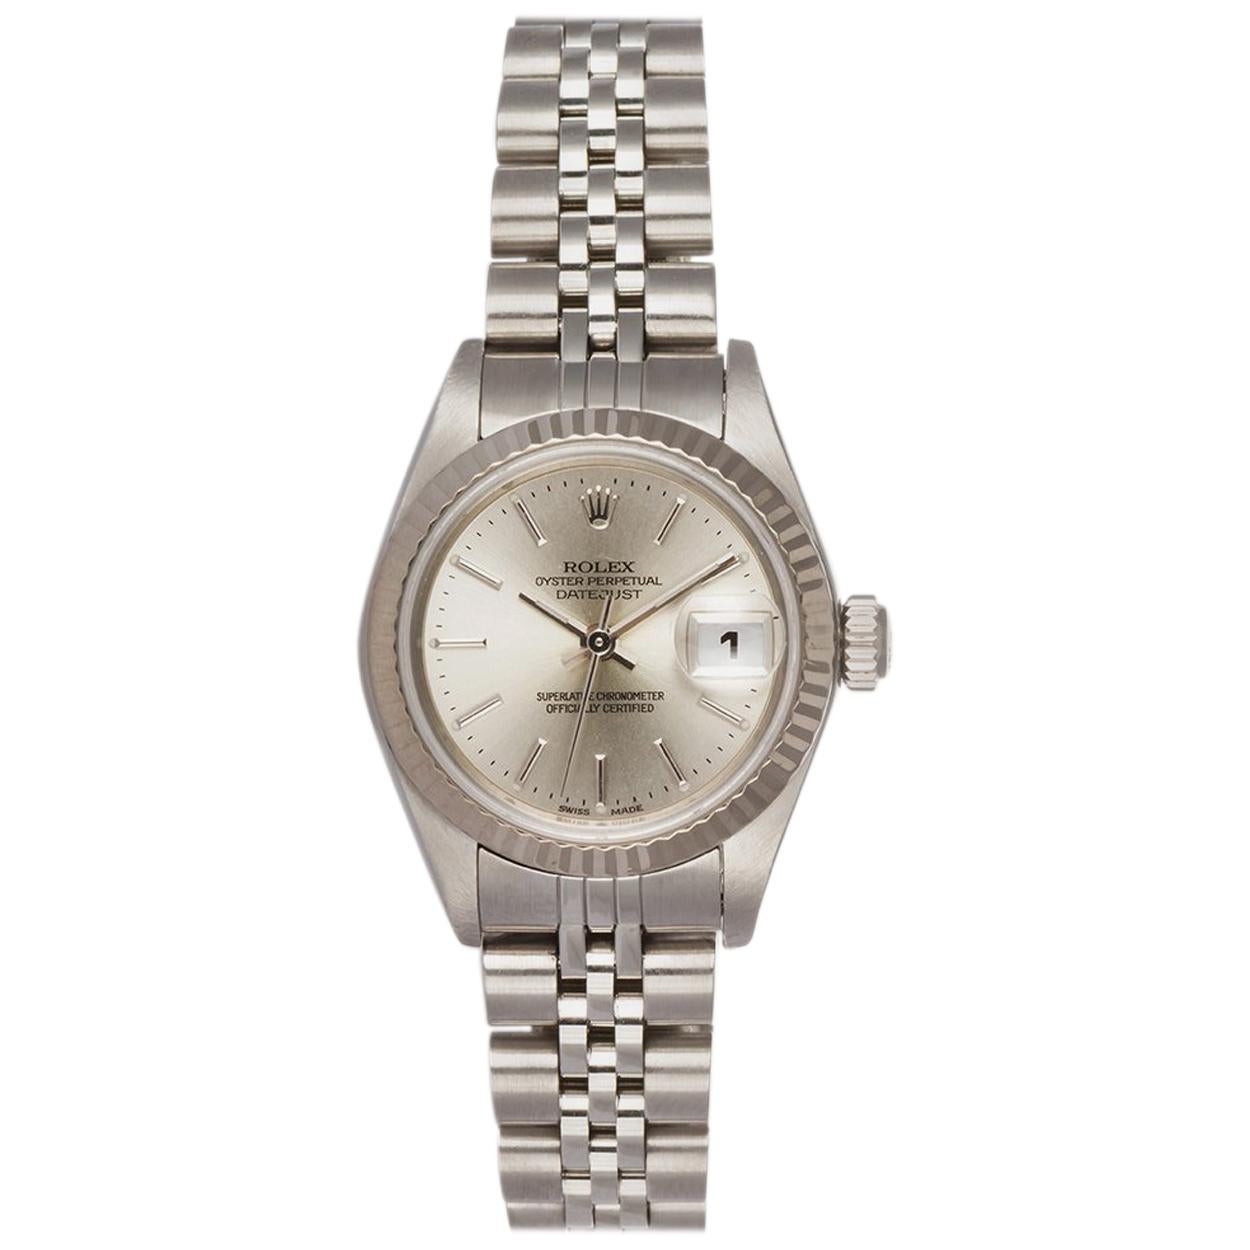 Ladies Rolex Datejust Stainless Steel 79174 with Box